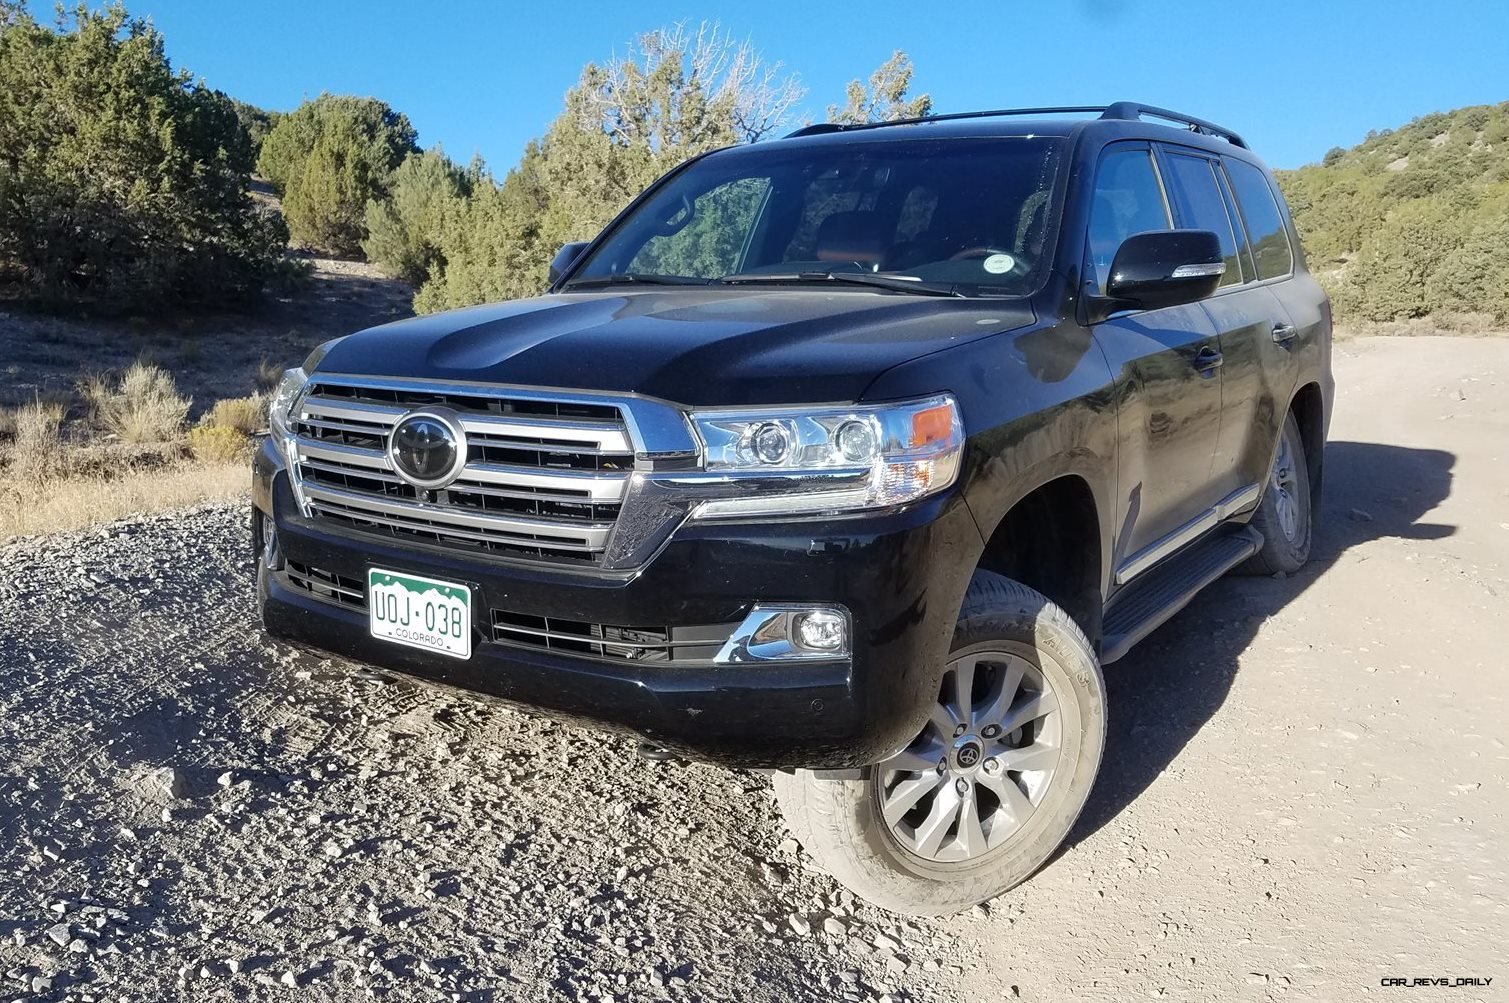 2018 Toyota Land Cruiser - Off-Road & Towing Review - By Matt Barnes » ROAD  TEST REVIEWS » Car-Revs-Daily.com